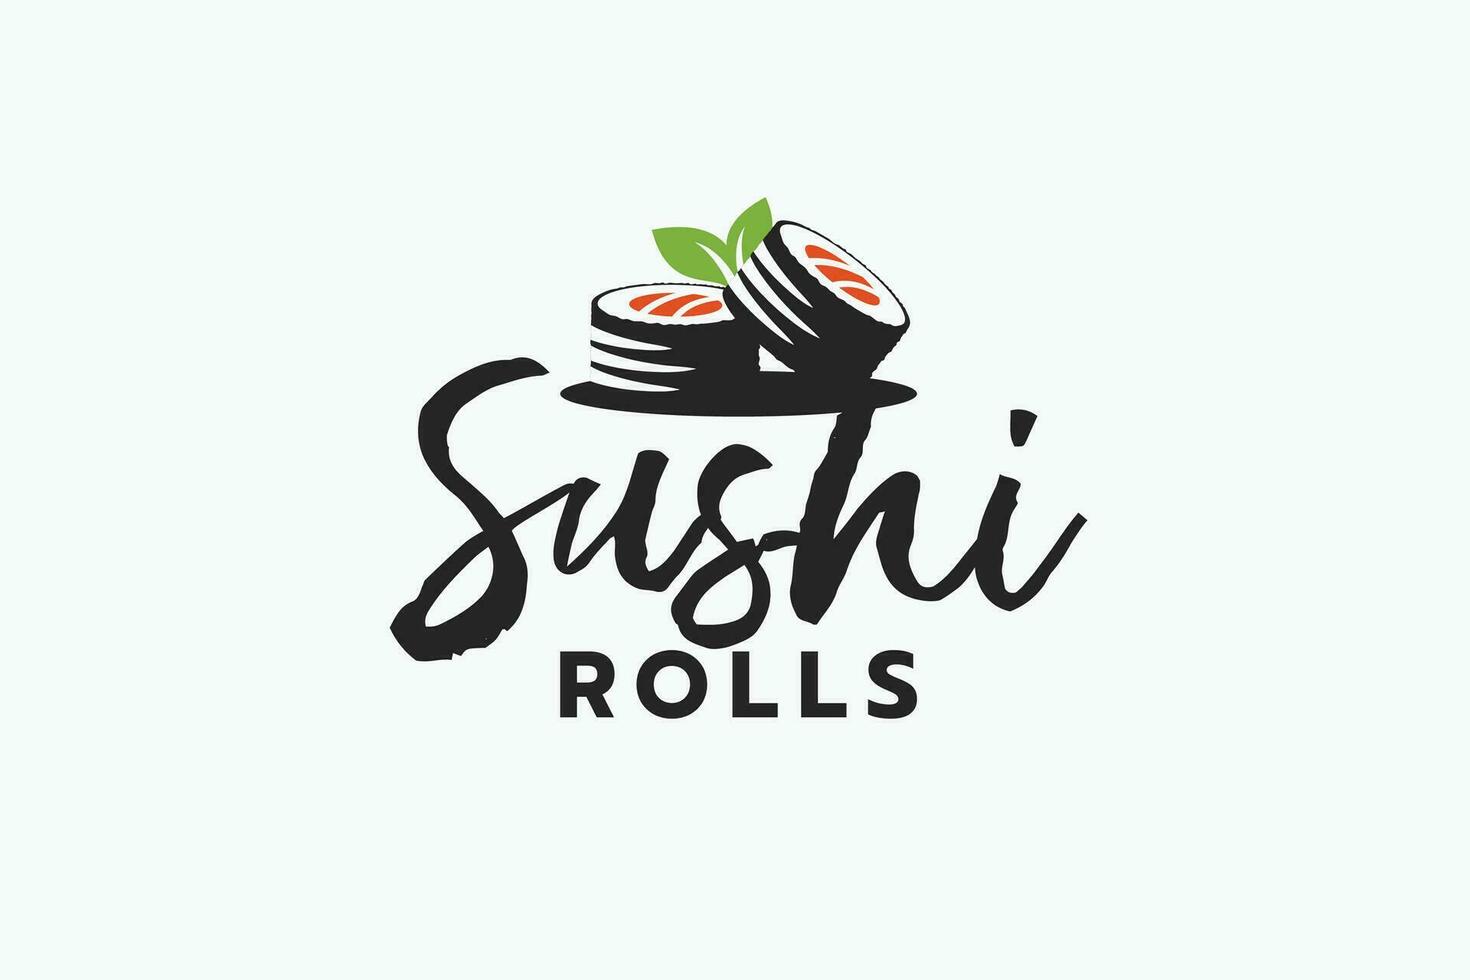 sushi rolls logo with a combination of rolls, leaves, and lettering for sushi bars, restaurants, cafes, etc. vector